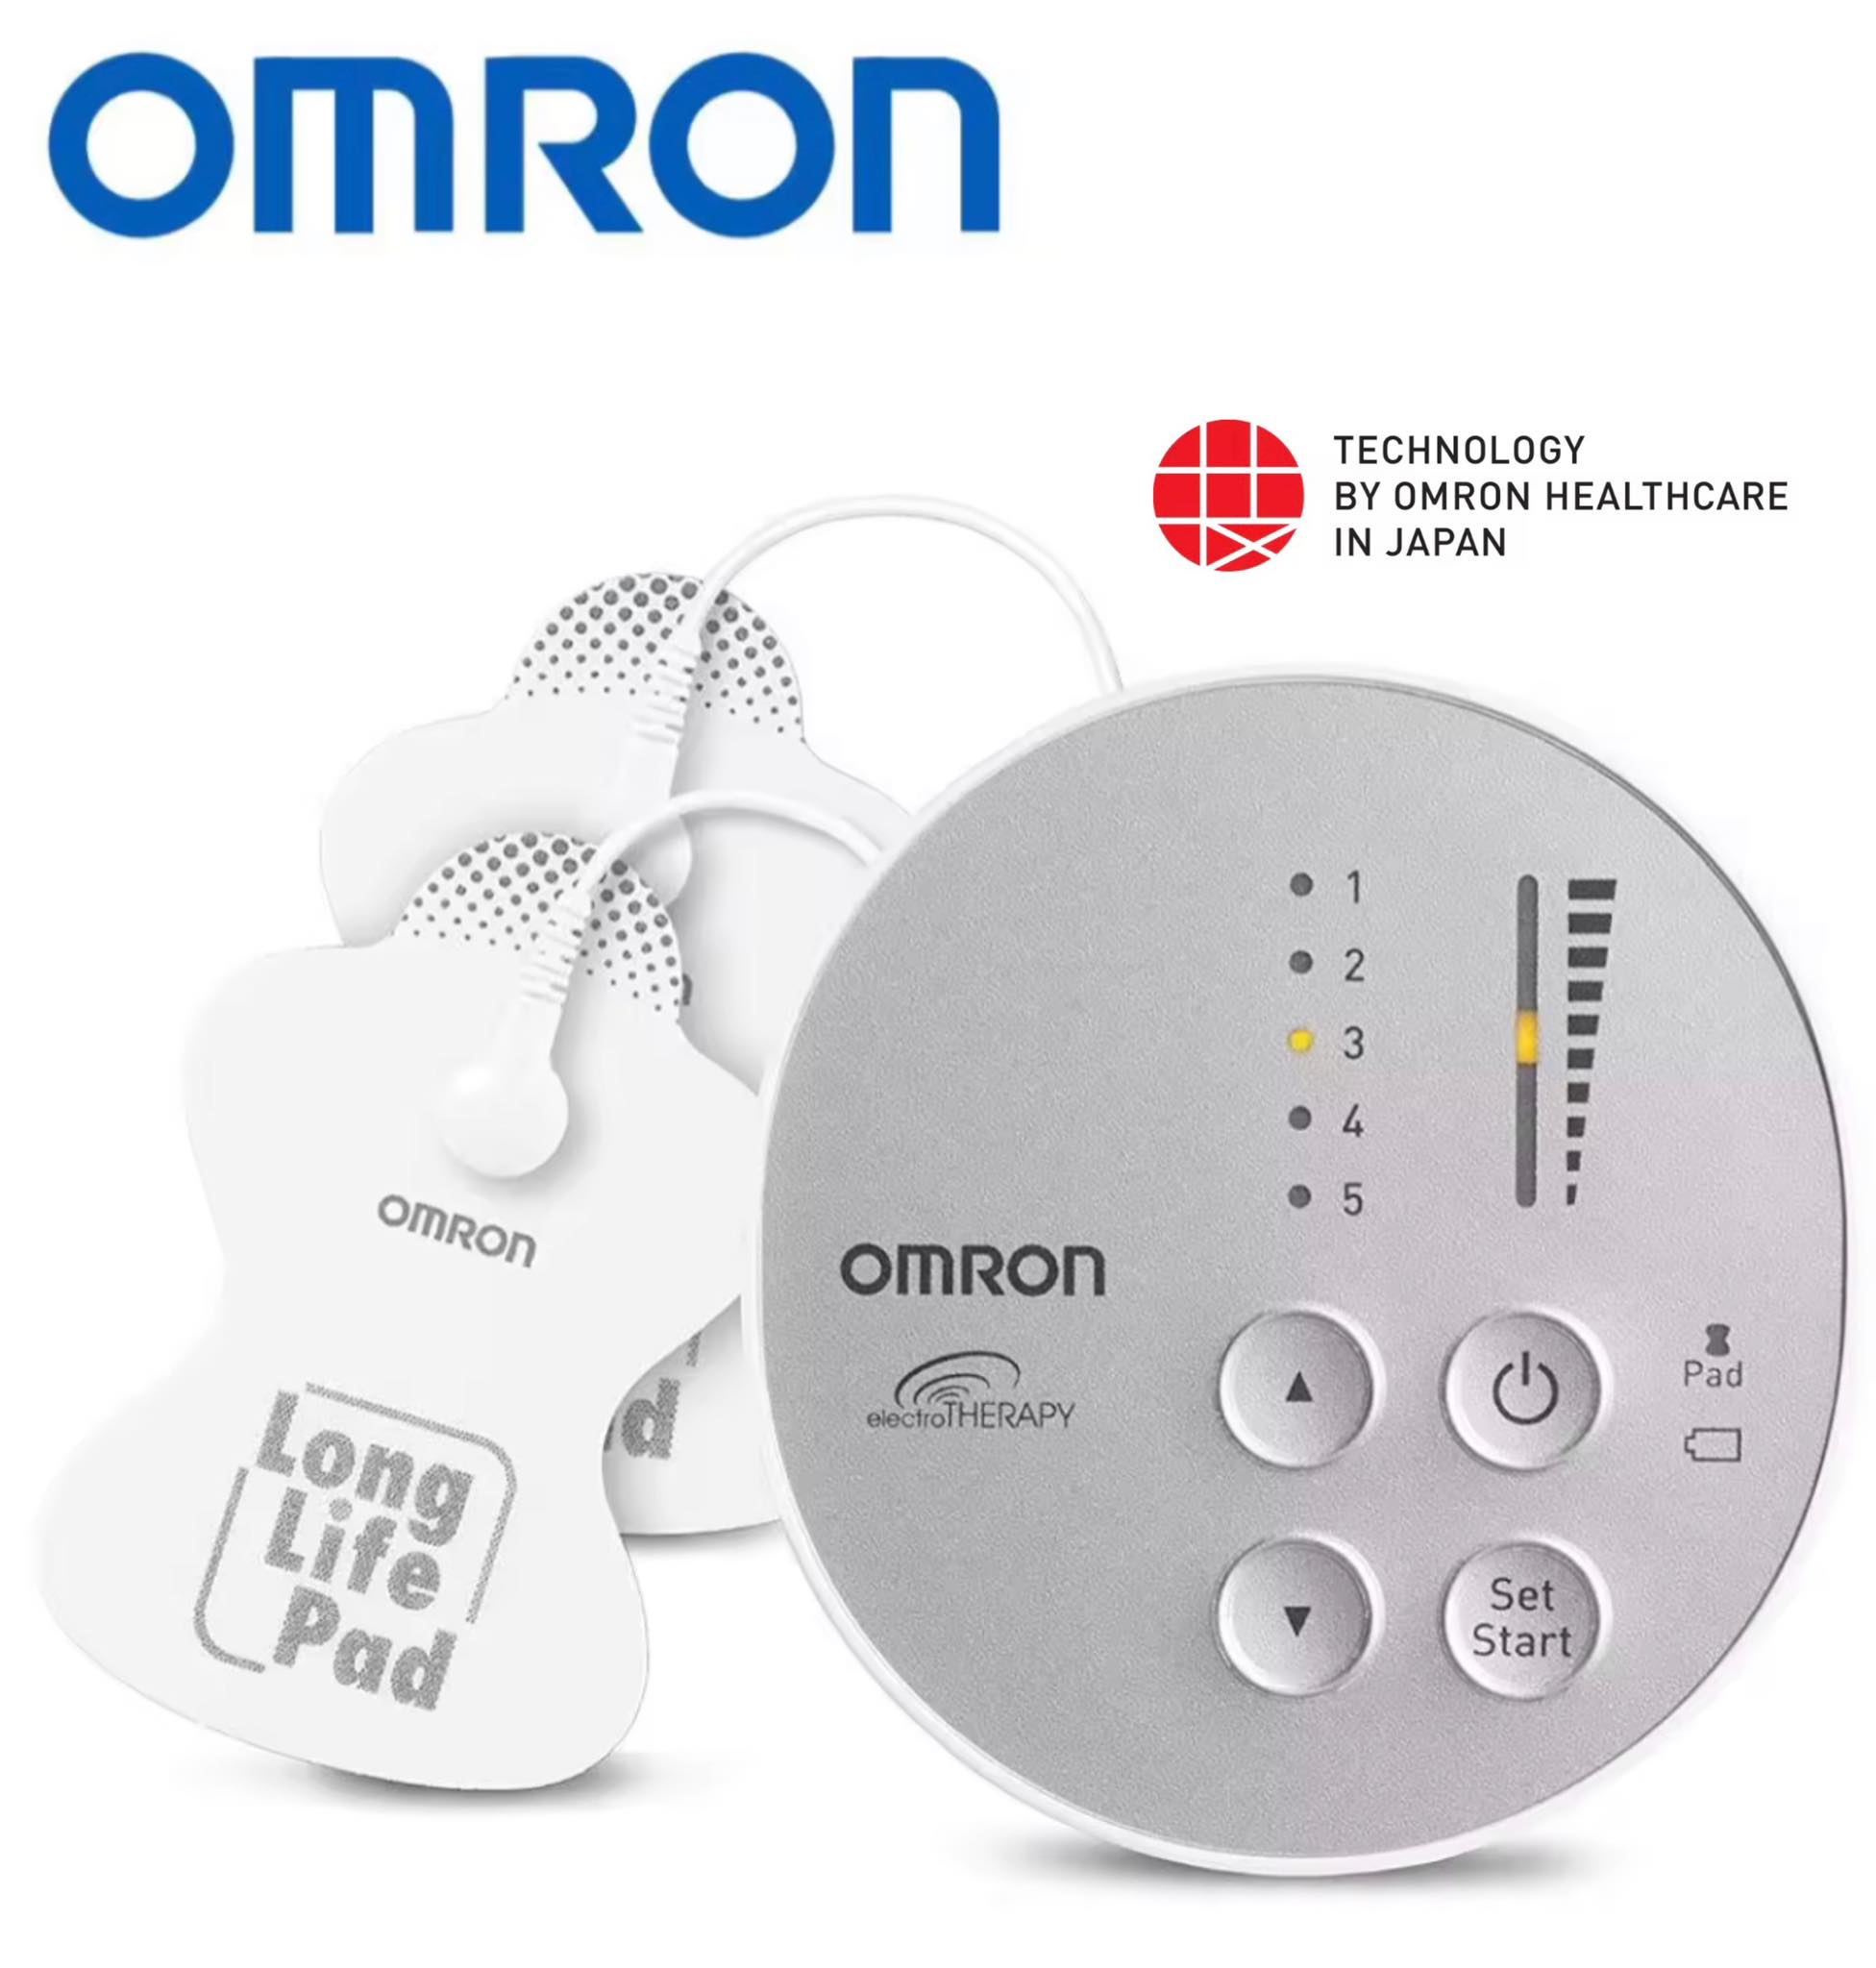 OMRON Pocket Pain Pro TENS Unit Muscle Stimulator, Simulated Massage  Therapy for Lower Back, Arm, Foot, Shoulder and Arthritis Pain, Drug-Free  Pain